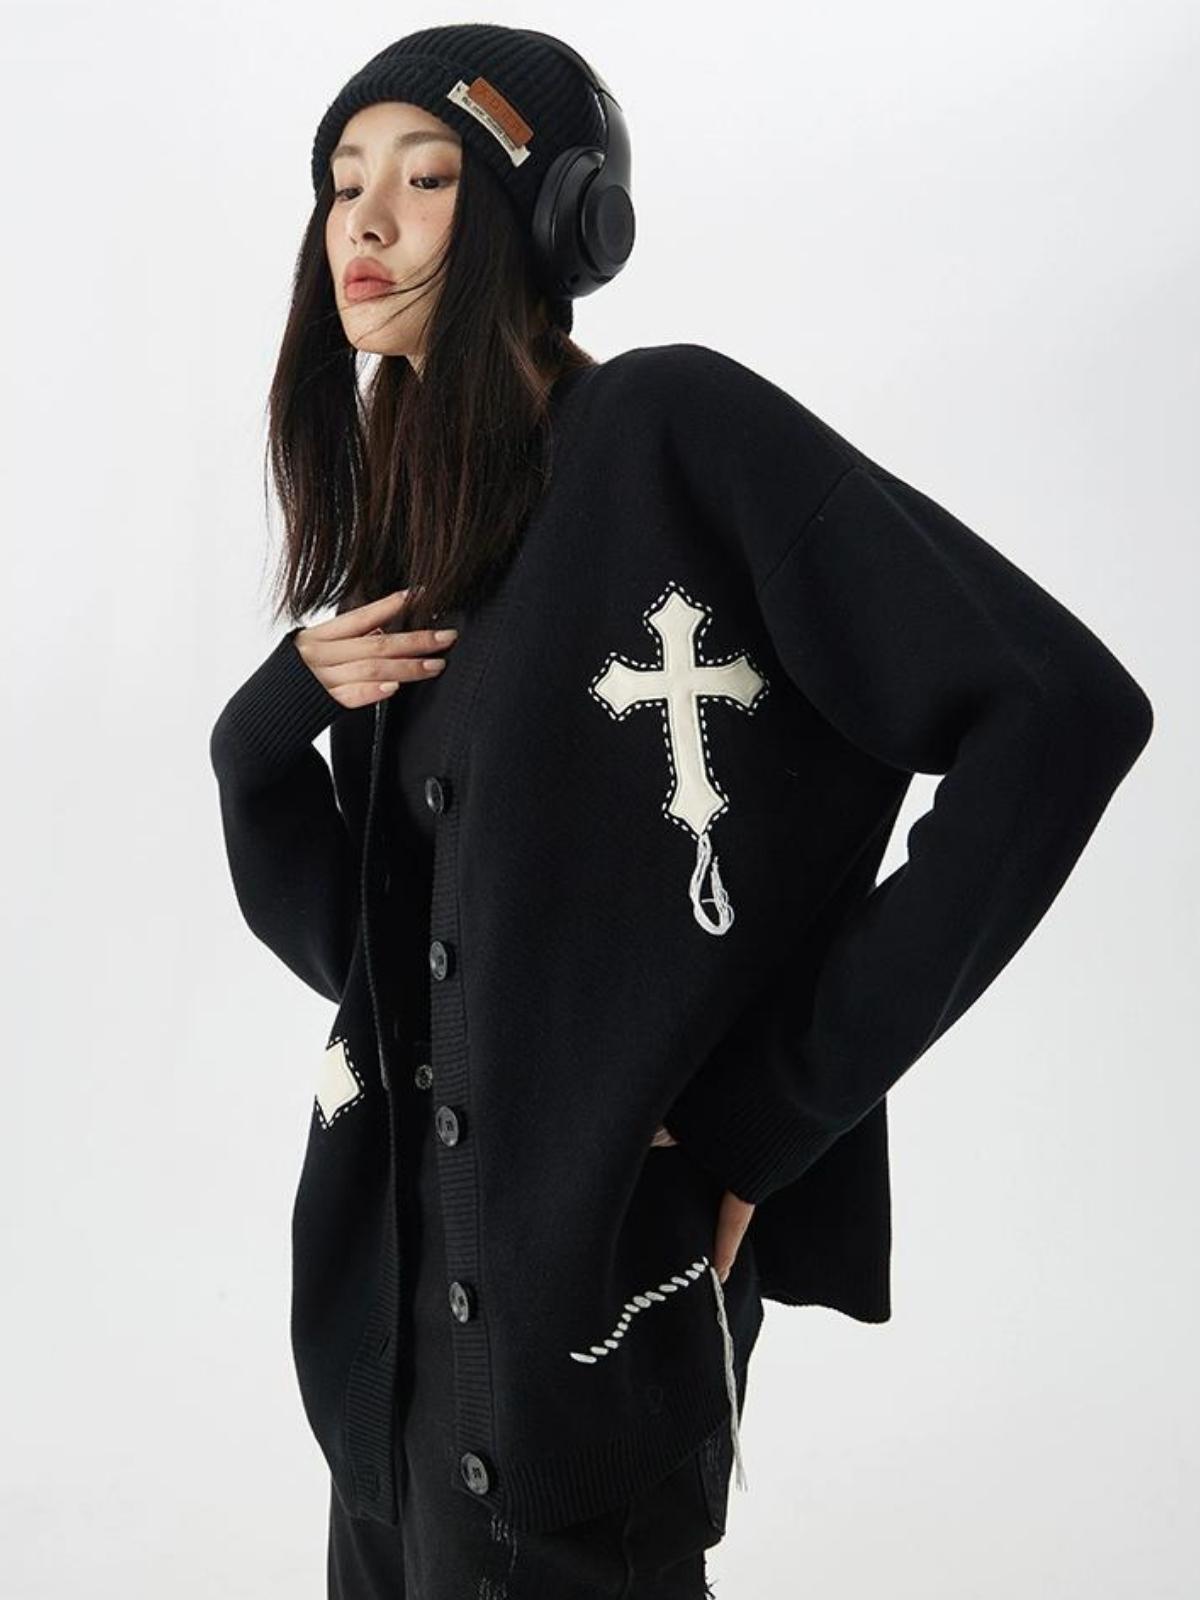 We Love Street Embroidered Cross V-neck Knitted Cardigan